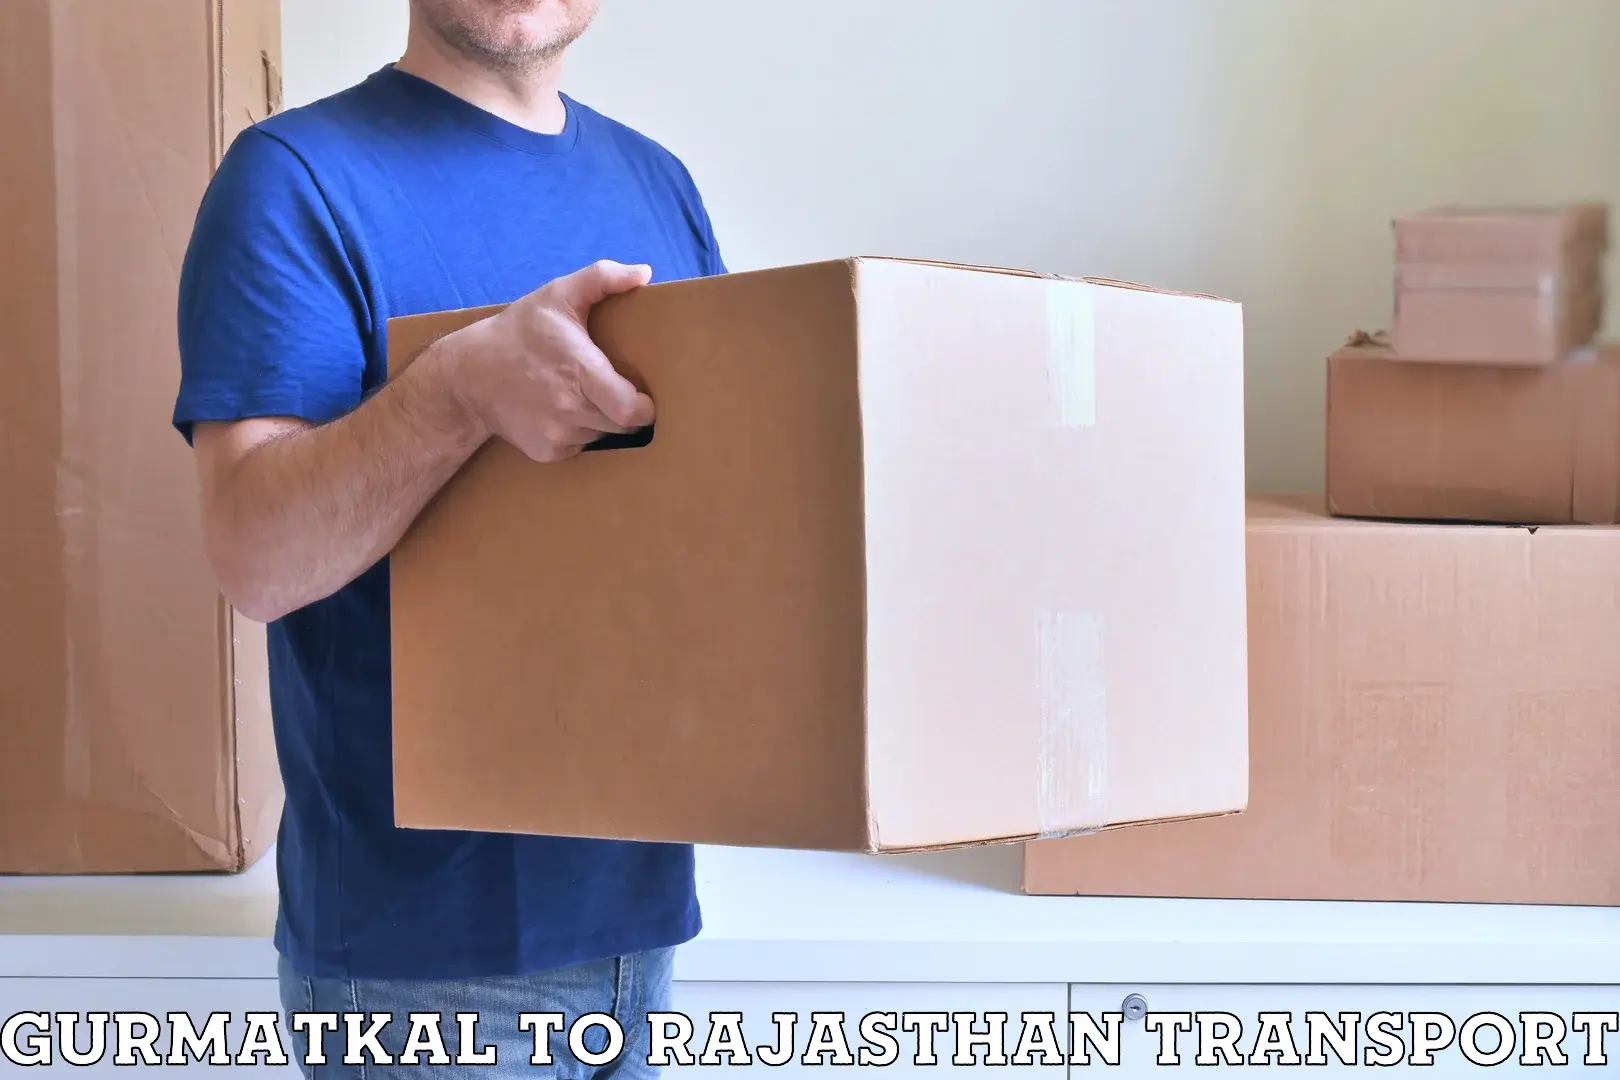 Container transport service Gurmatkal to Yeswanthapur